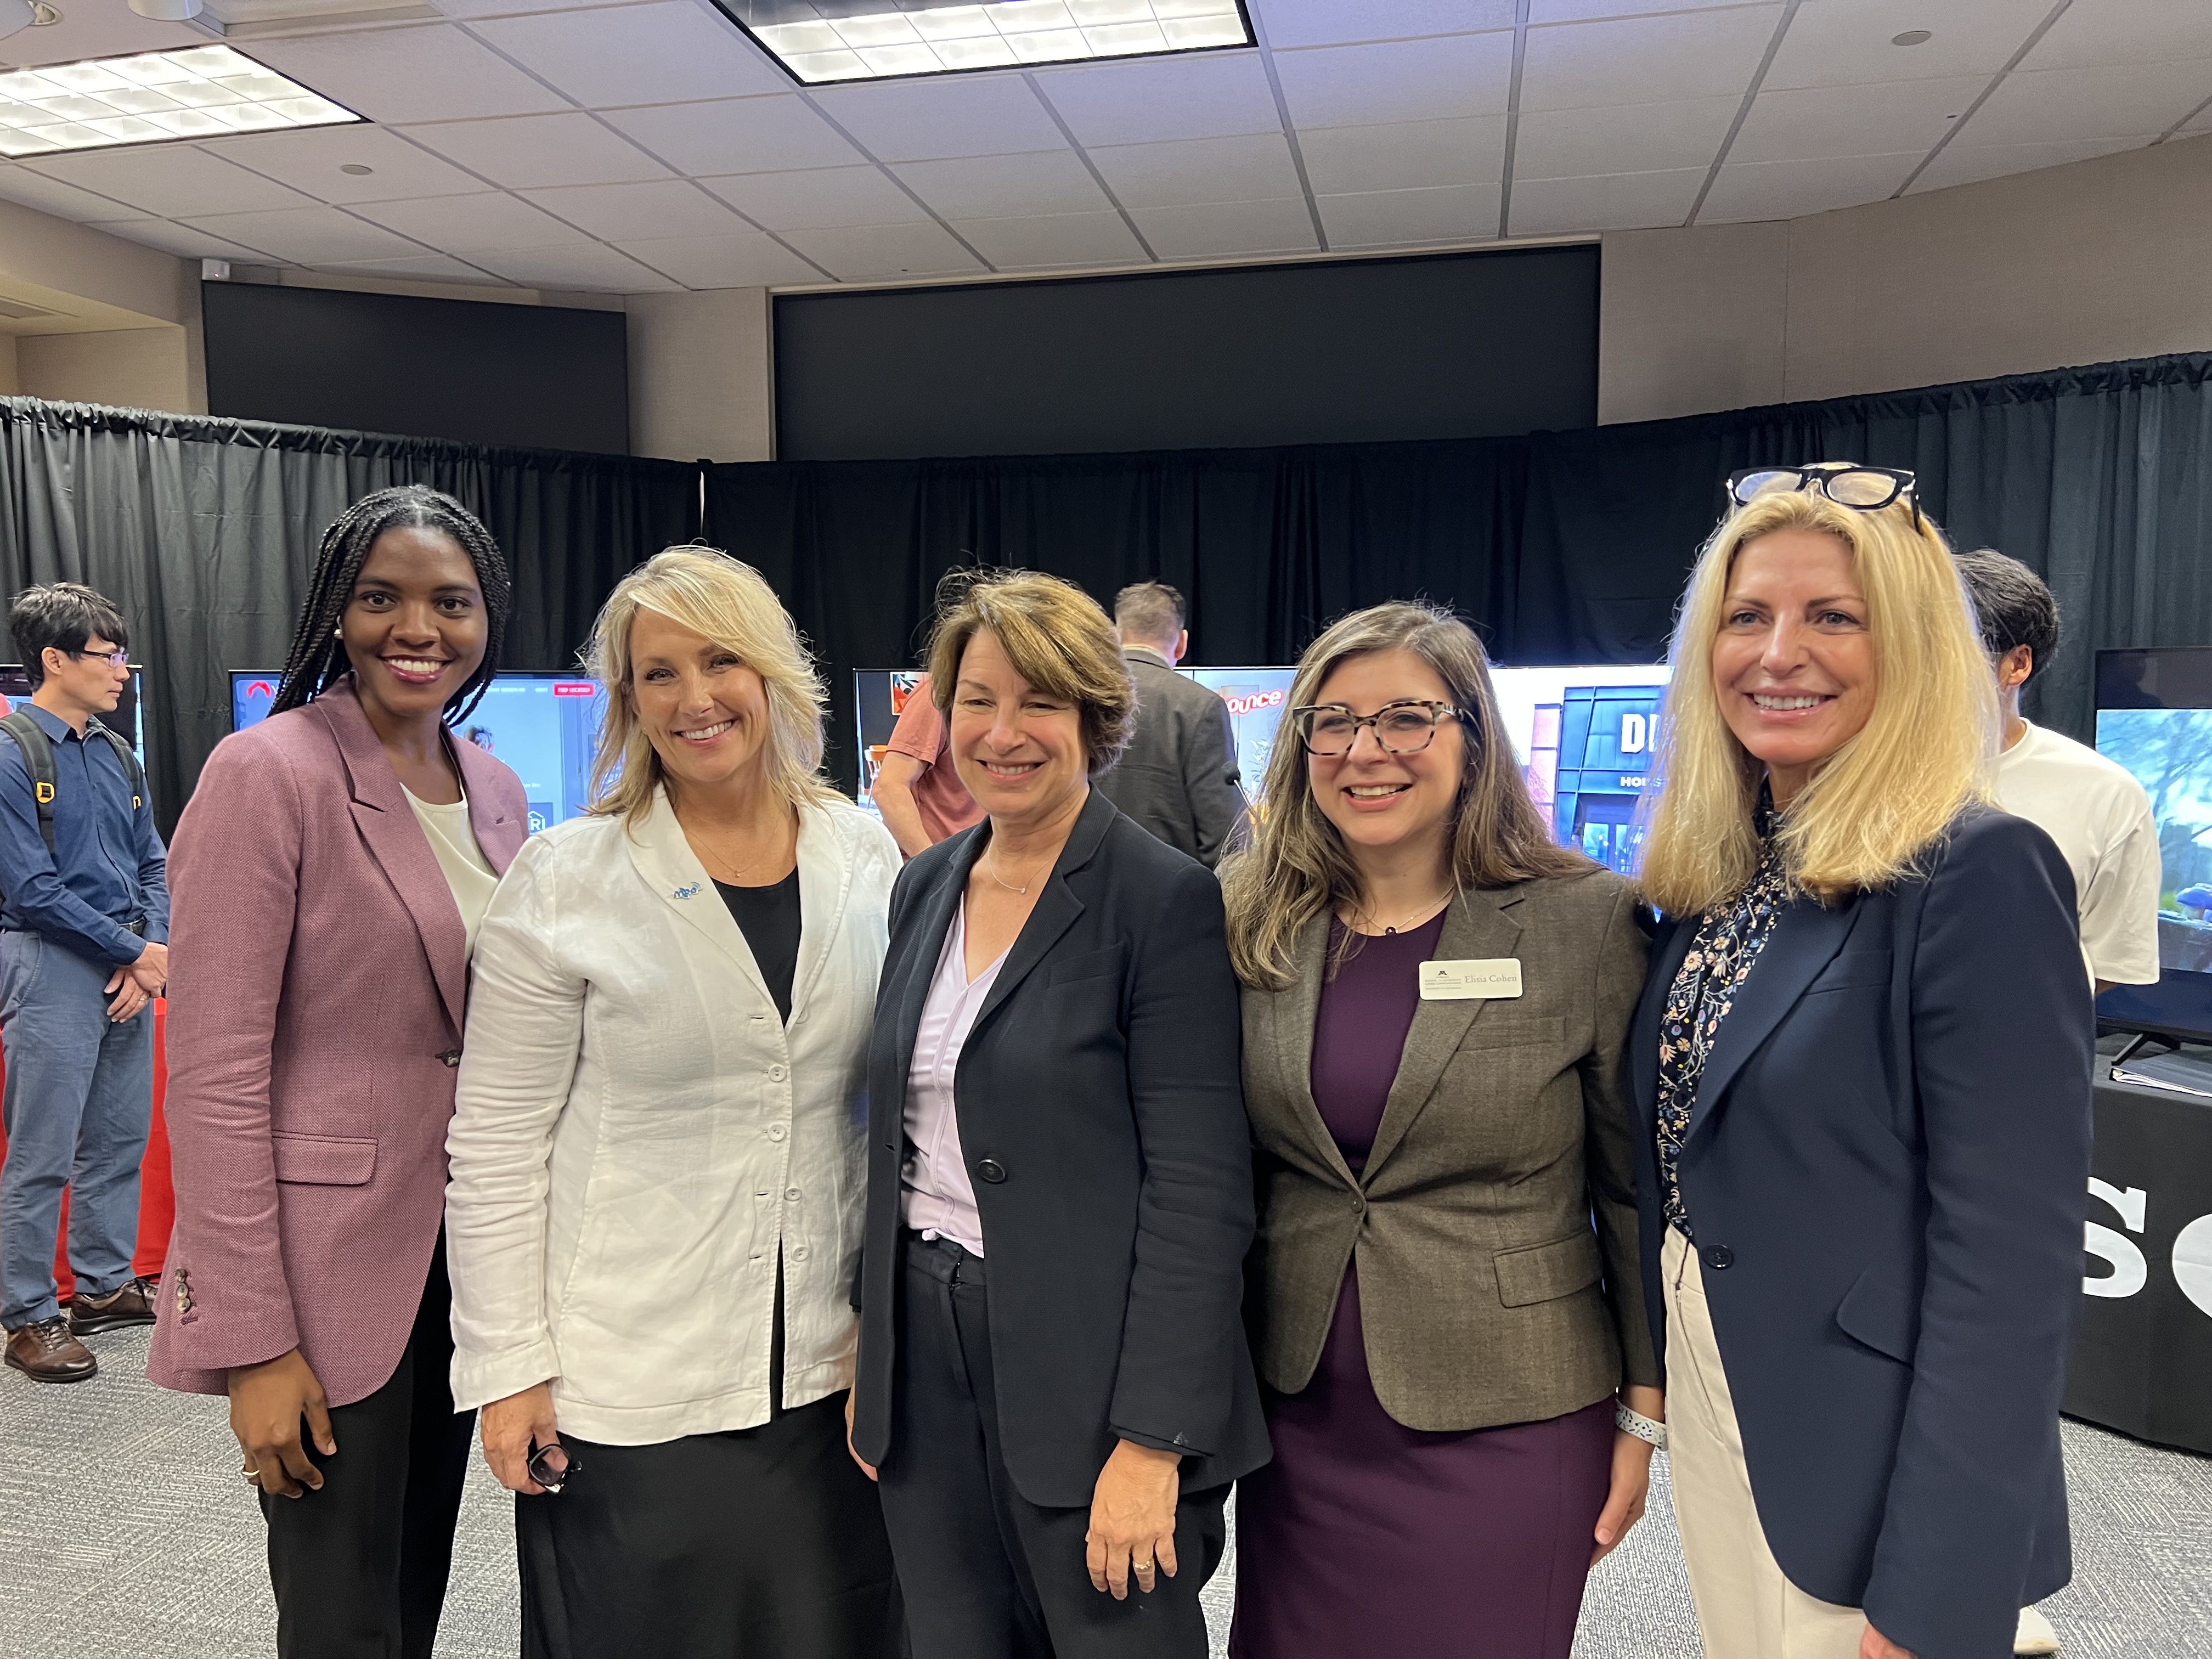 Char Stanberry, NAB Government Relations, Wendy Paulson, President of Minnesota Broadcasters Association, Senator Amy Klobuchar, Hubbard School Director Elisia Cohen, and Anne Schelle, Managing Director of Pearl TV broadcaster group